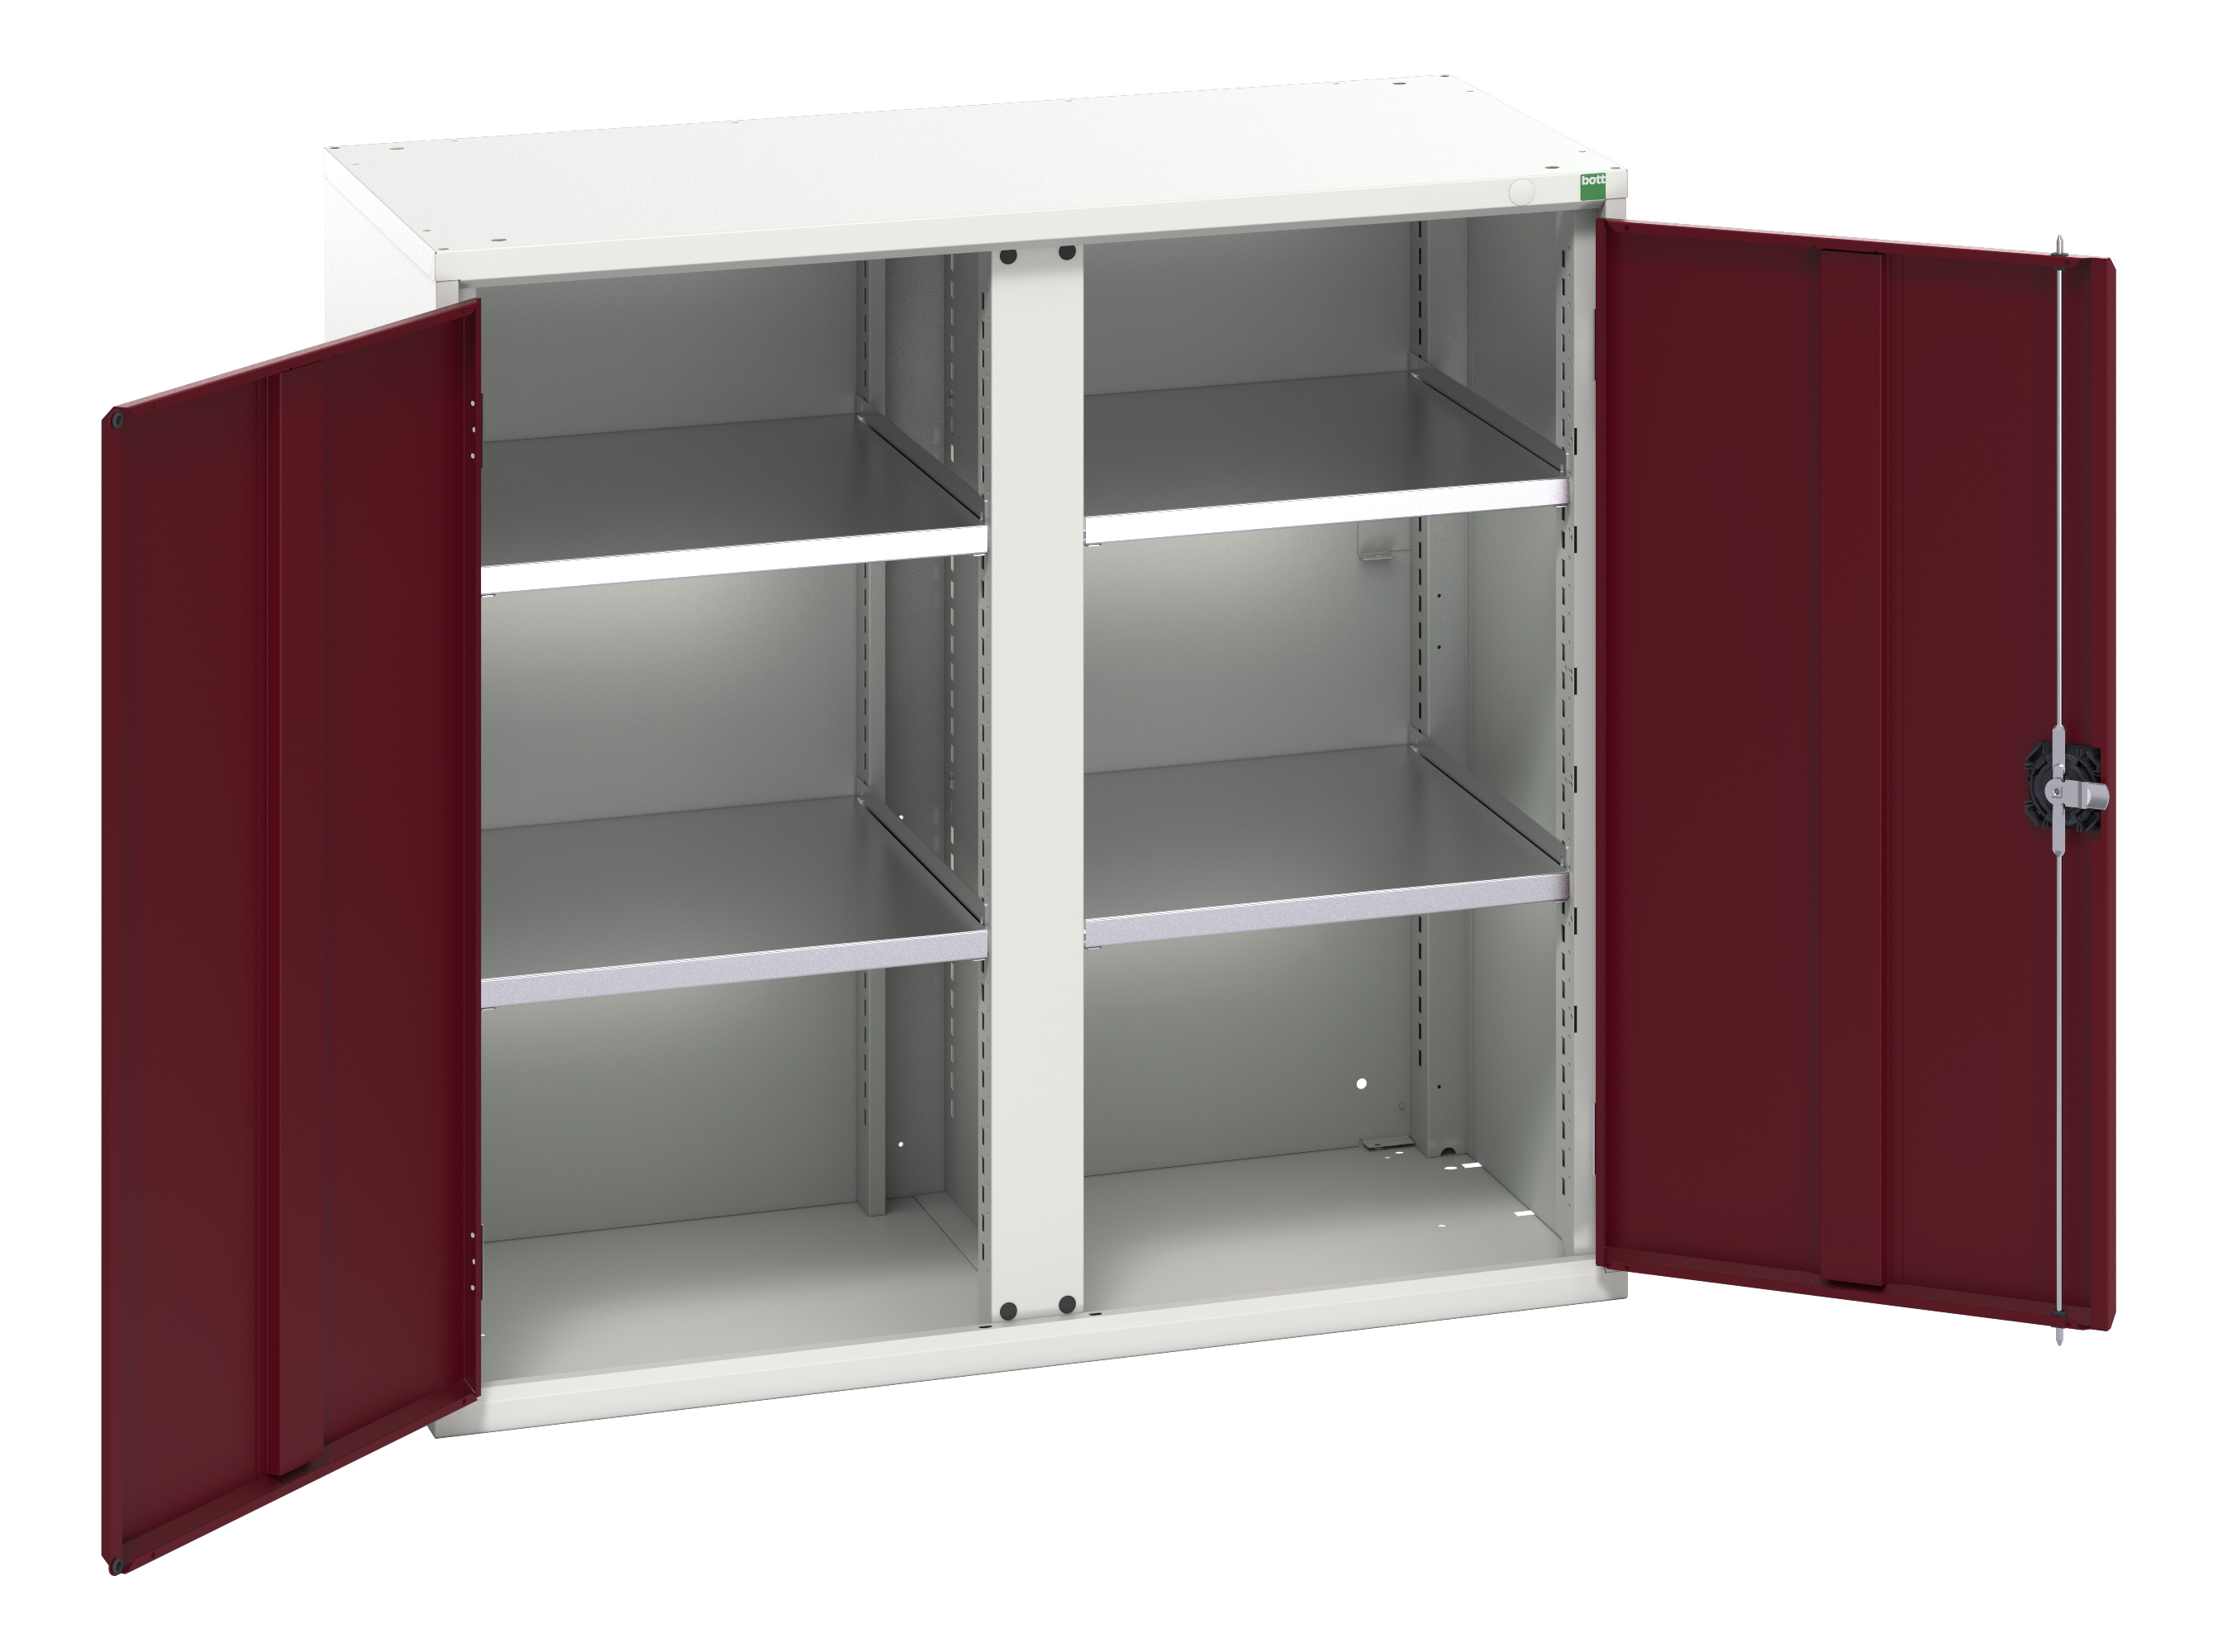 Bott Verso Kitted Cupboard With Vertical Partition - 16926555.24